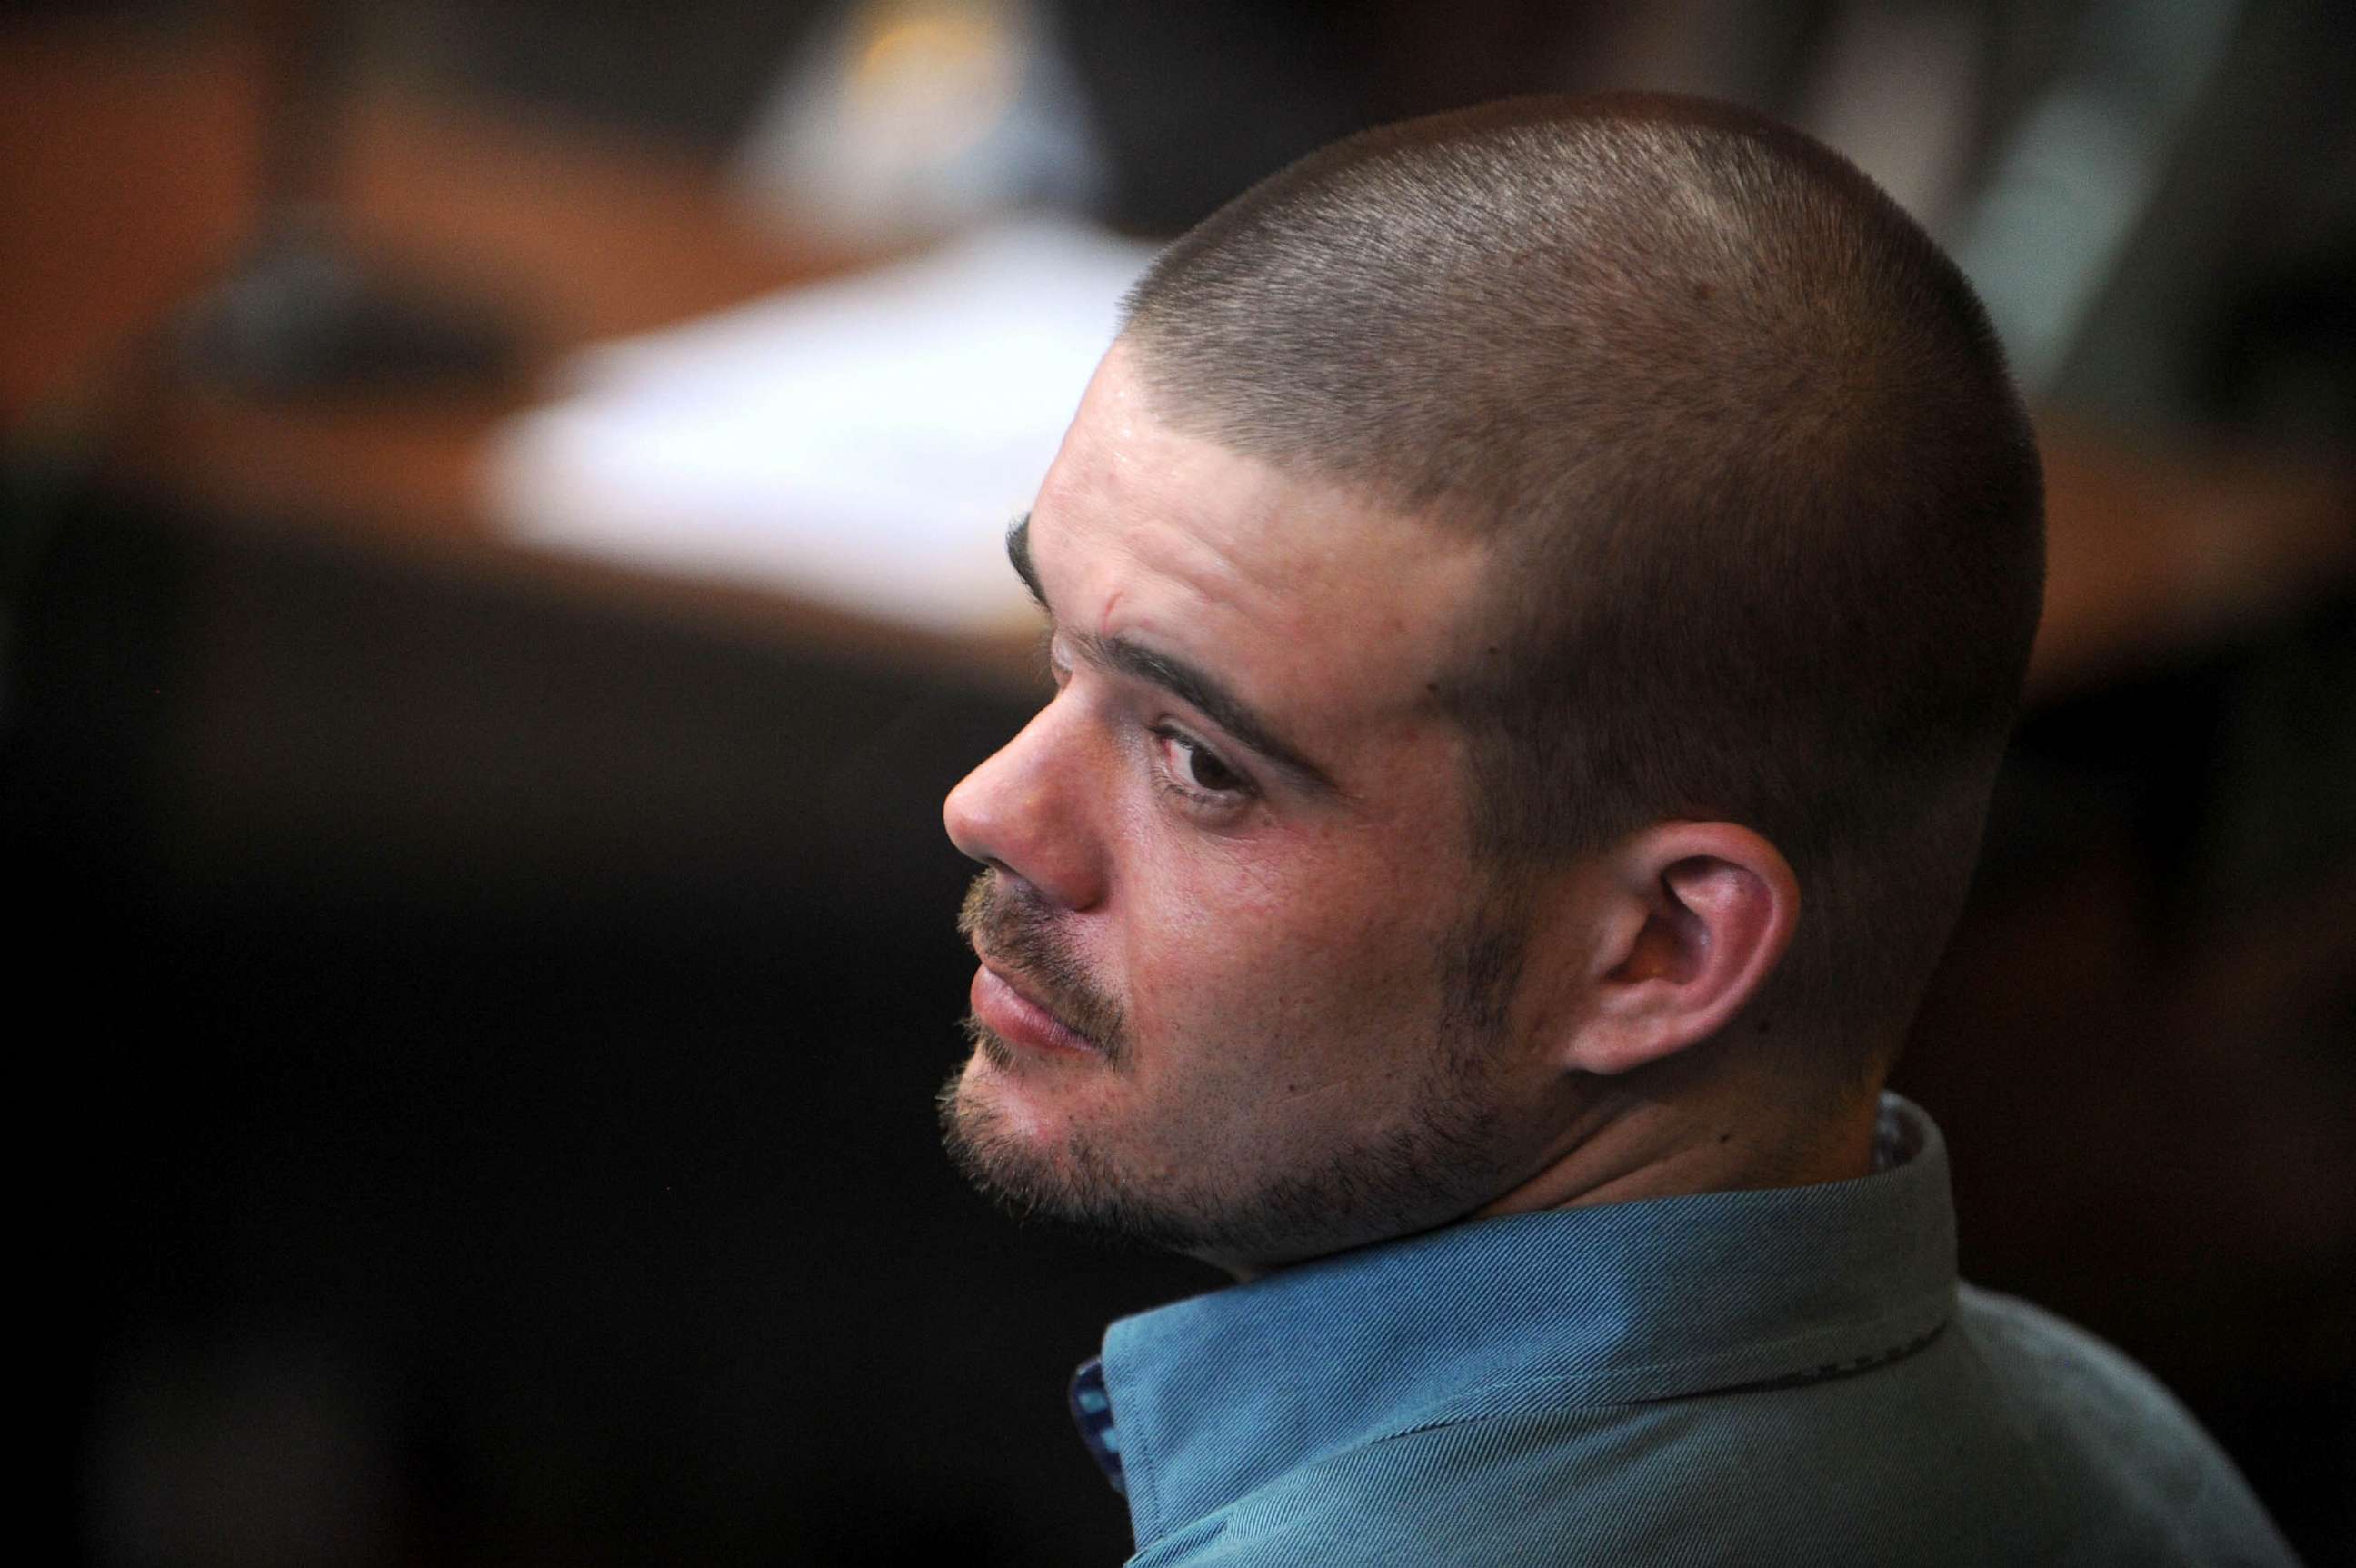 PHOTO: FILE - Dutch national Joran Van der Sloot is pictured during a hearing at the Lurigancho prison in Lima, Jan. 11, 2011.